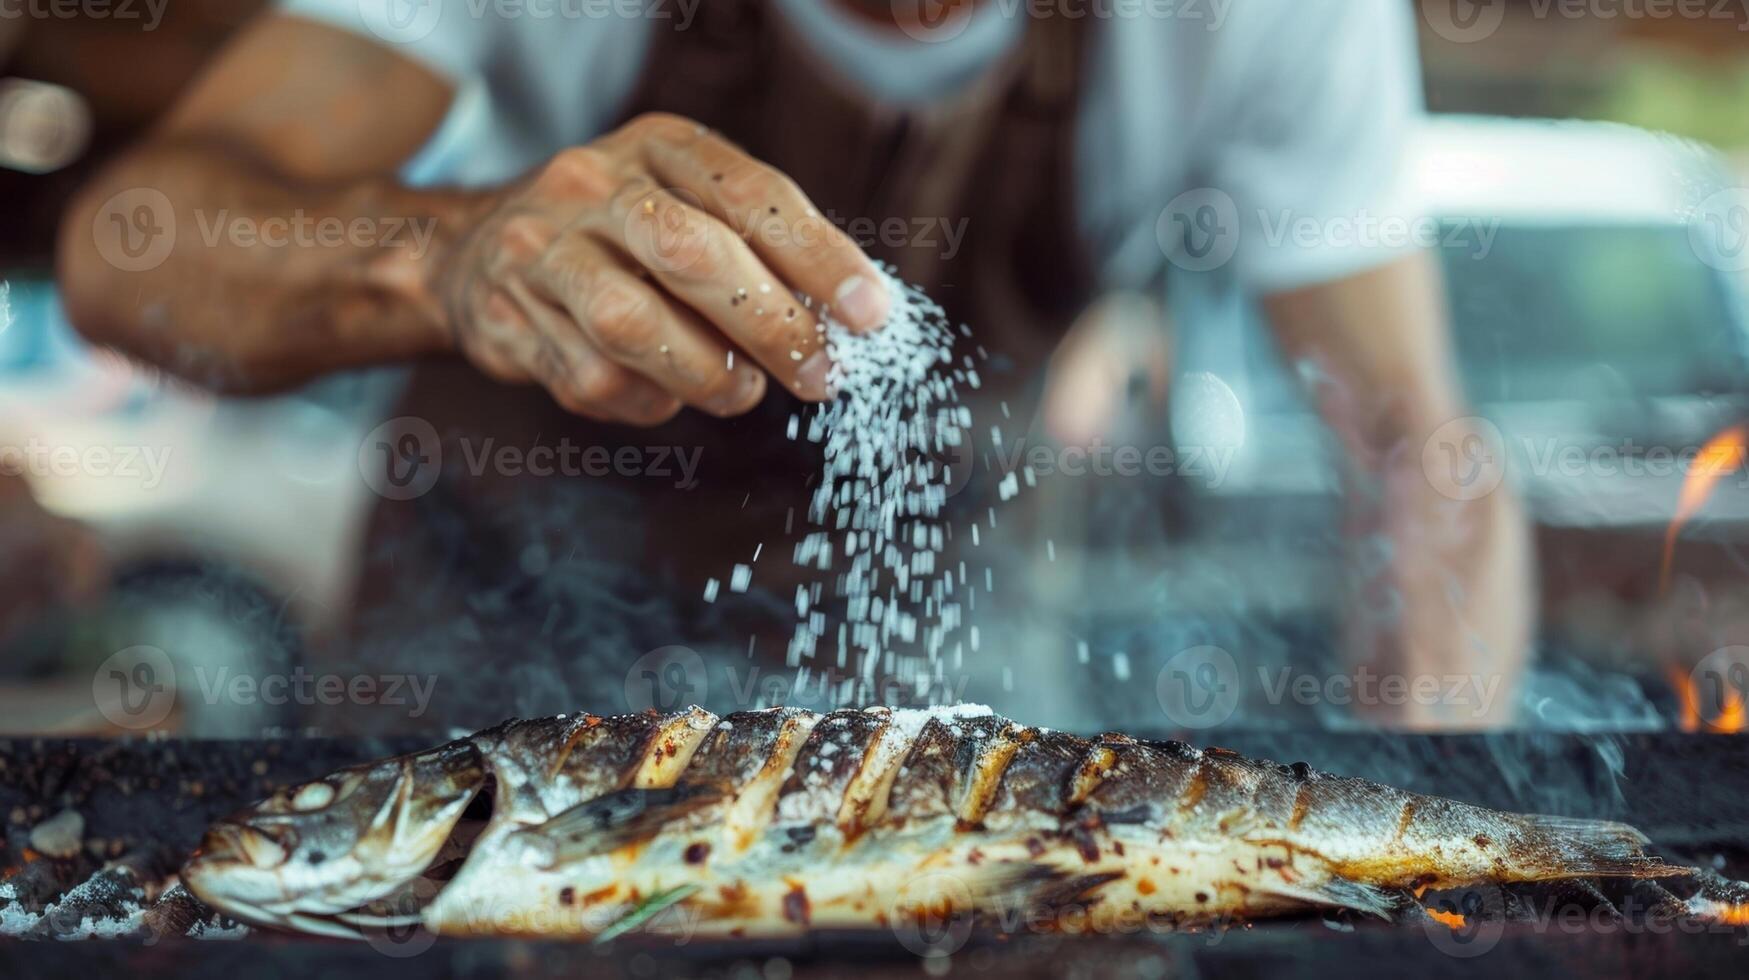 A man sprinkling sea salt onto a grilled fish with a serene expression on his face photo